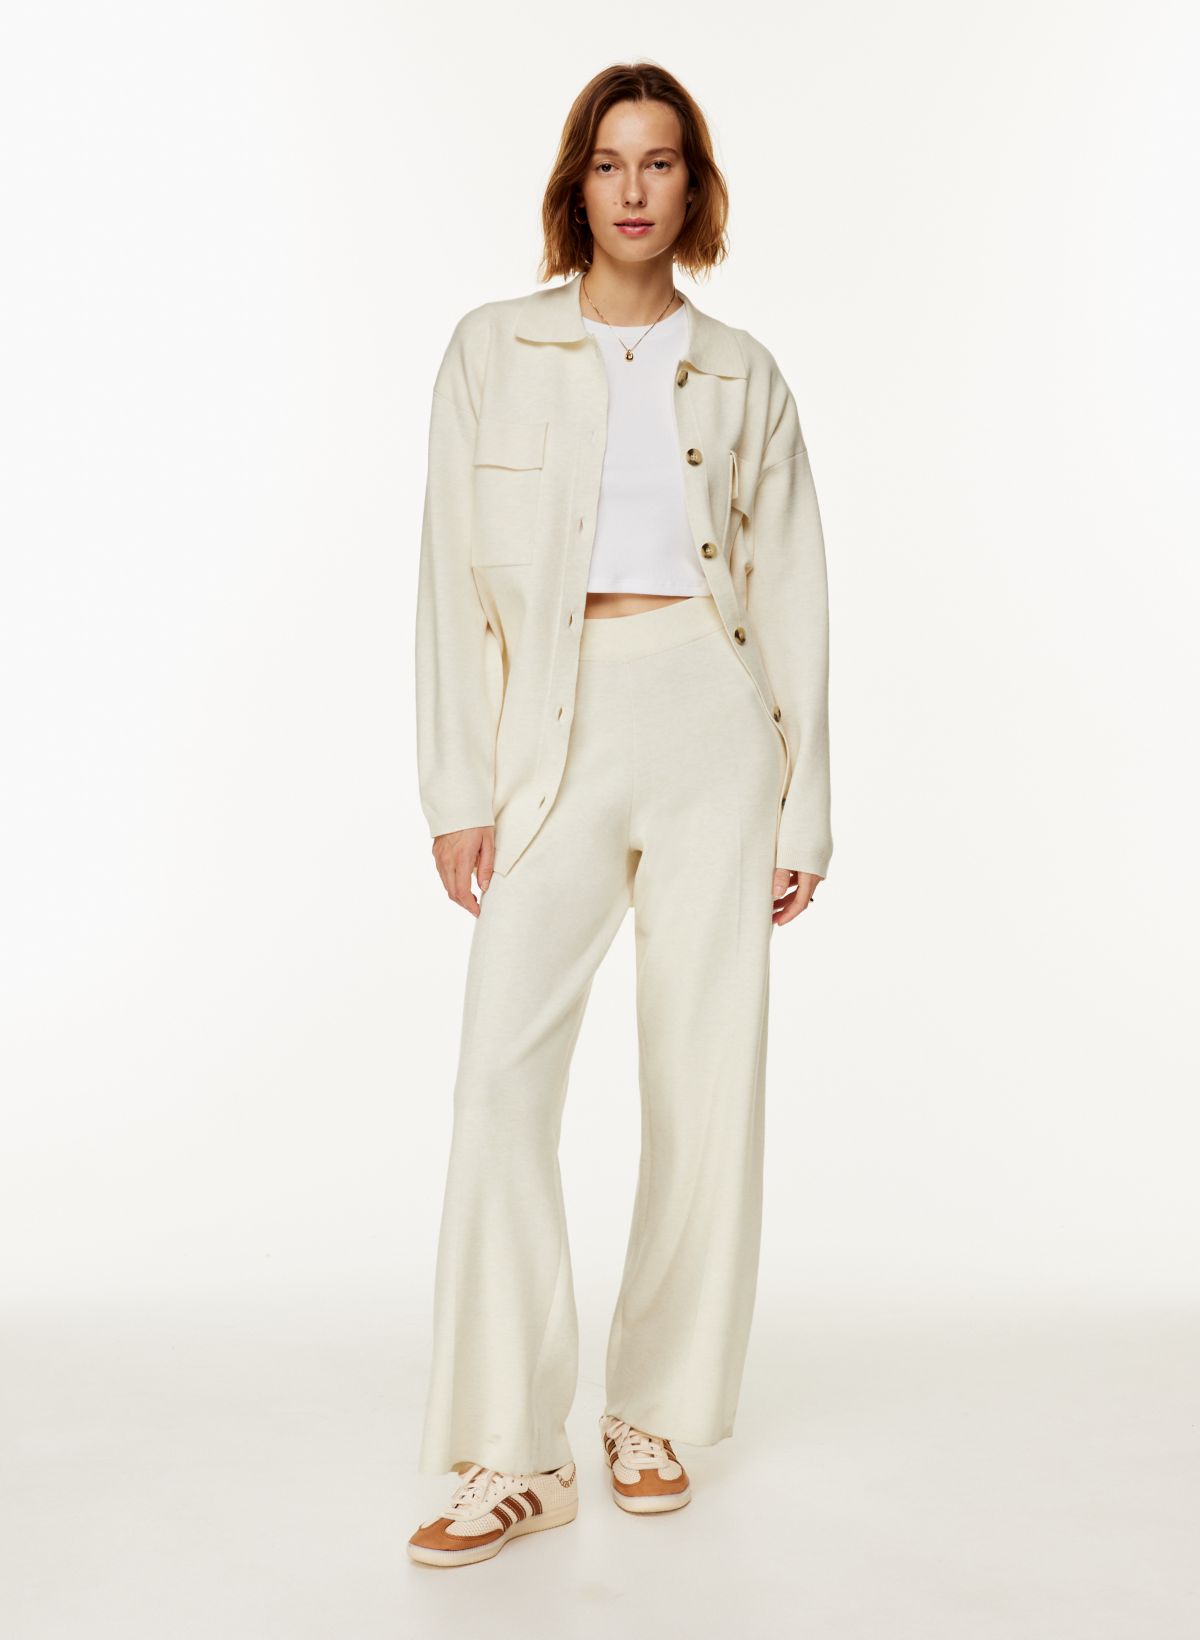 ZARA HIGH-WAISTED GOLD BUTTON PANTS WIDE LEG WHITE MEDIUM ** NEW WITH FLAW